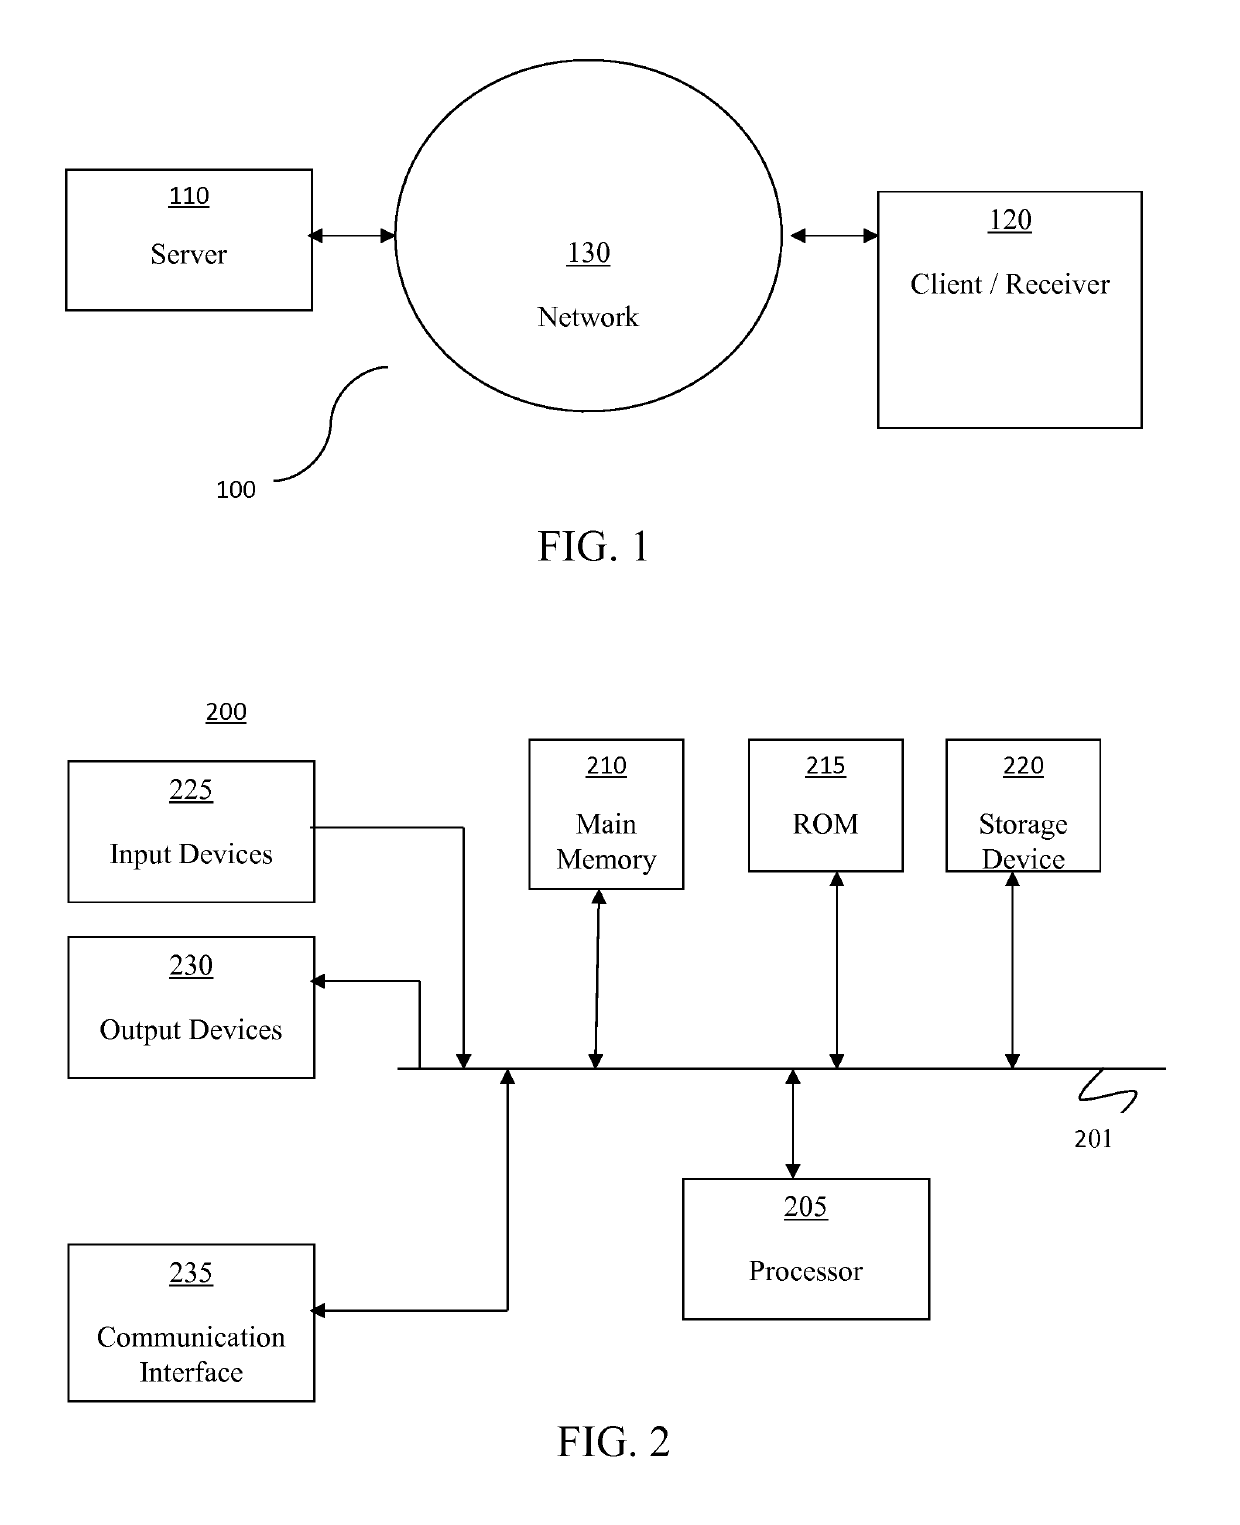 Single-chip virtualizing and obfuscating storage system for portable computing devices